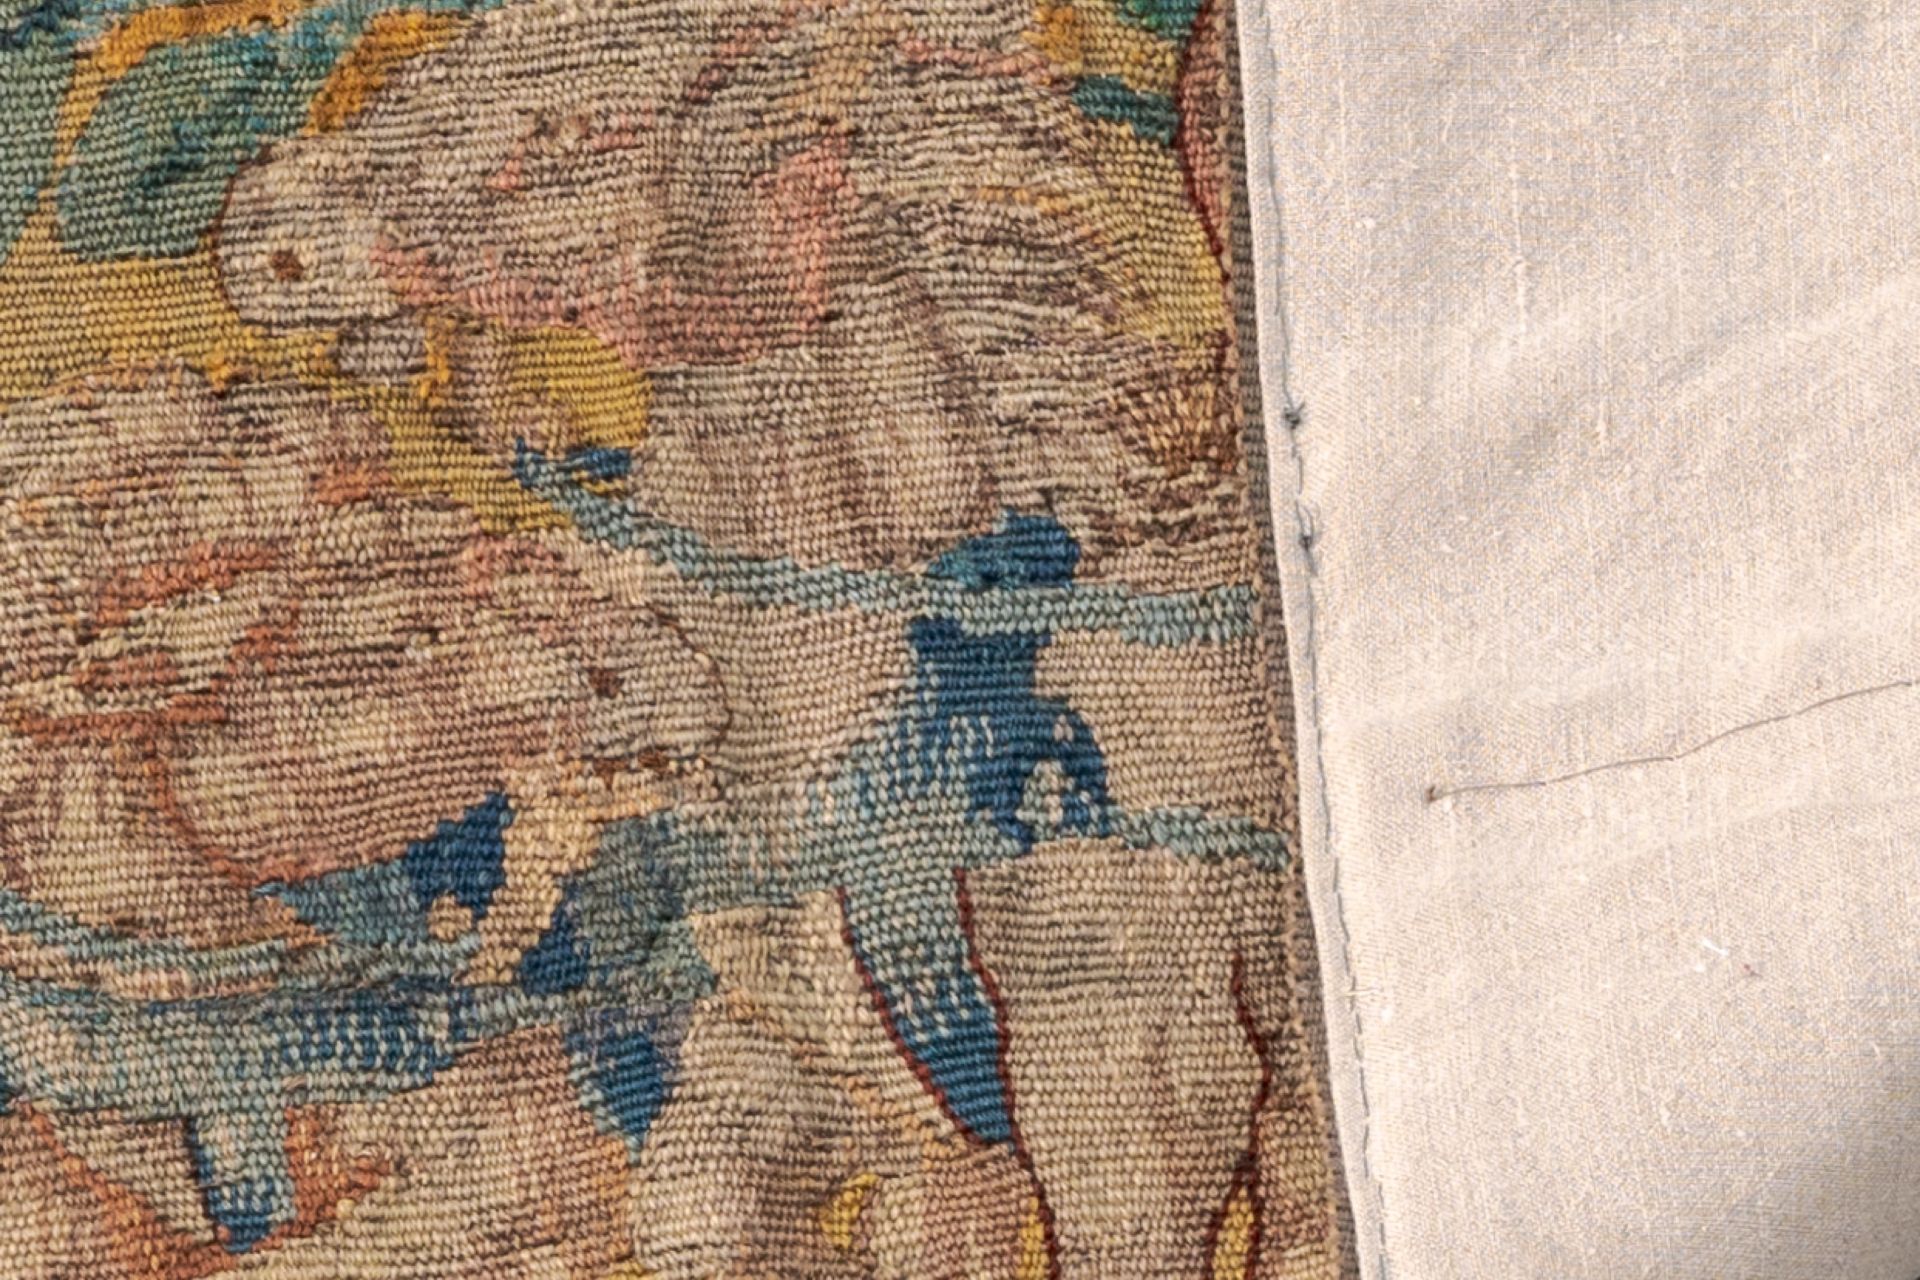 Two fragments of Flemish wall tapestries with musicians, 17th C. - Image 9 of 10